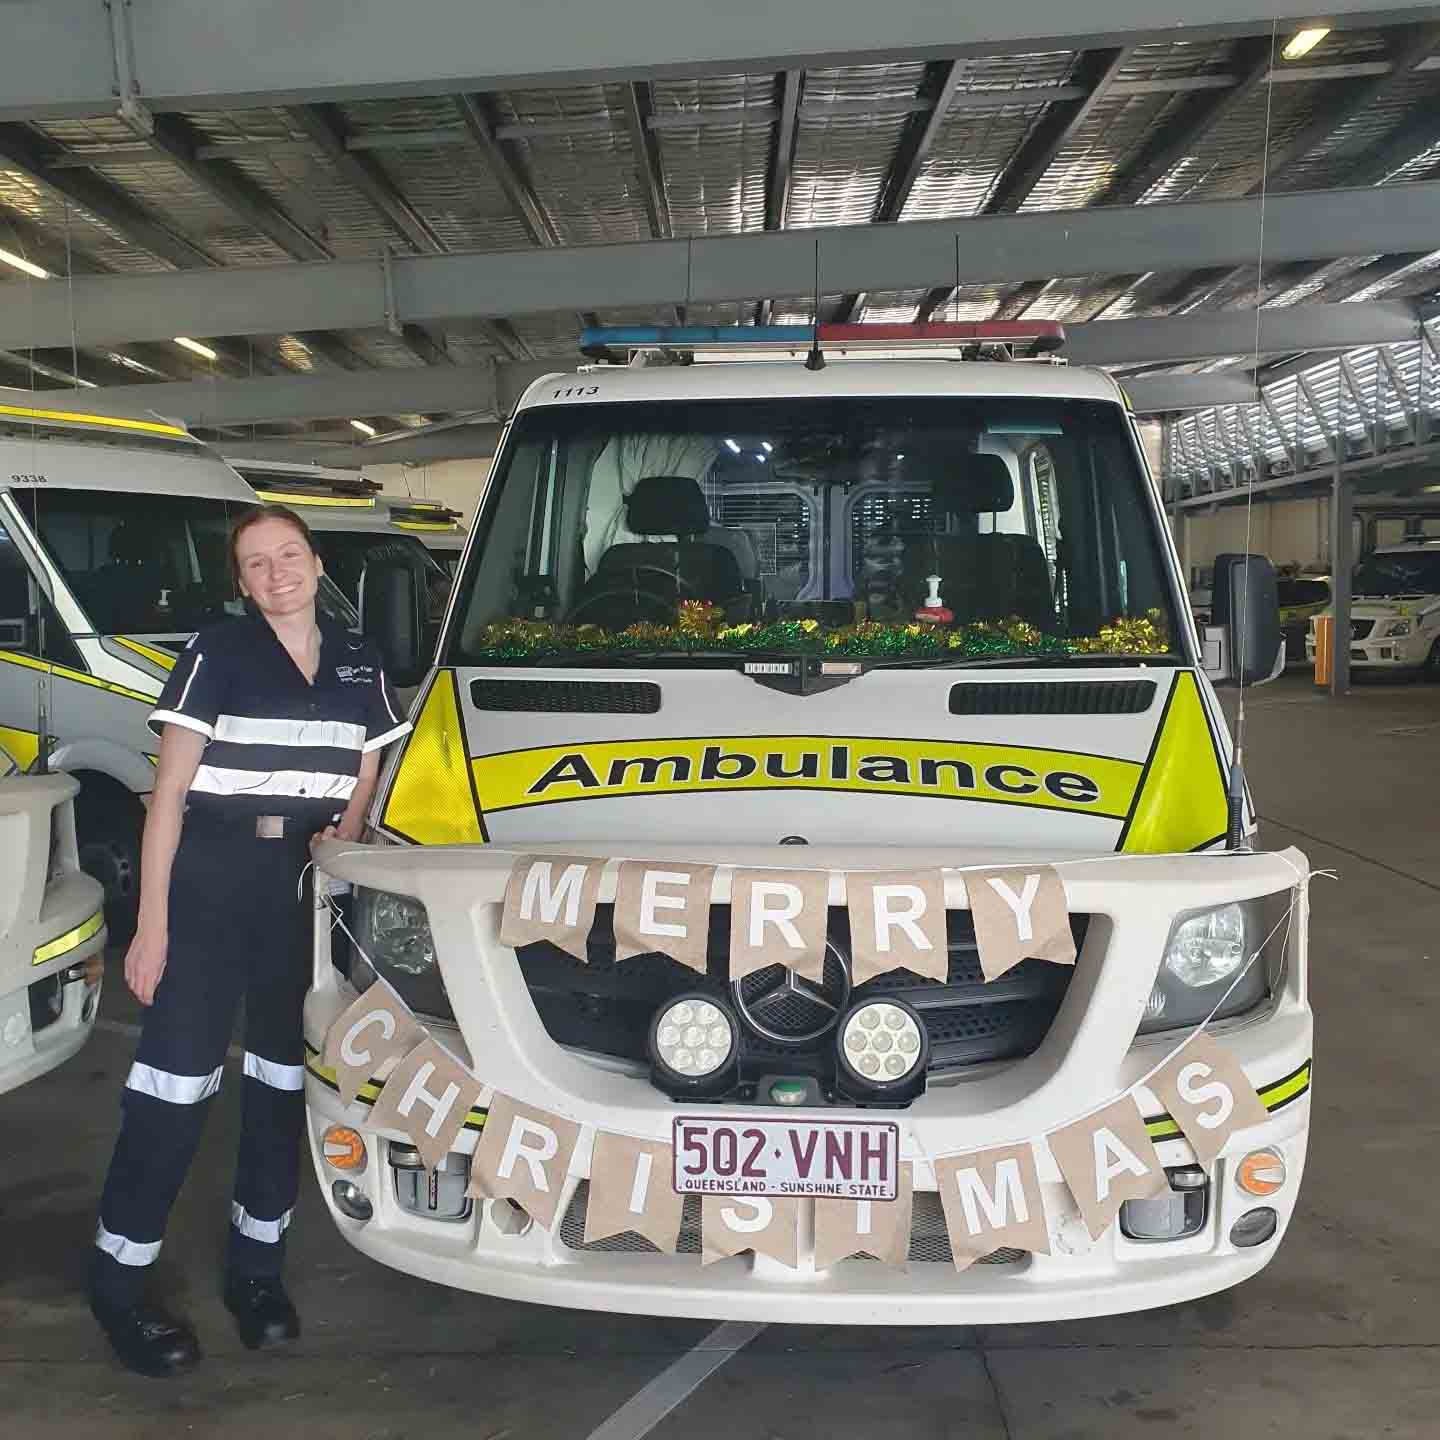 Megan wears a paramedic uniform and stands next to the front of an ambulance decorated with banners that read 'Merry Christmas'.